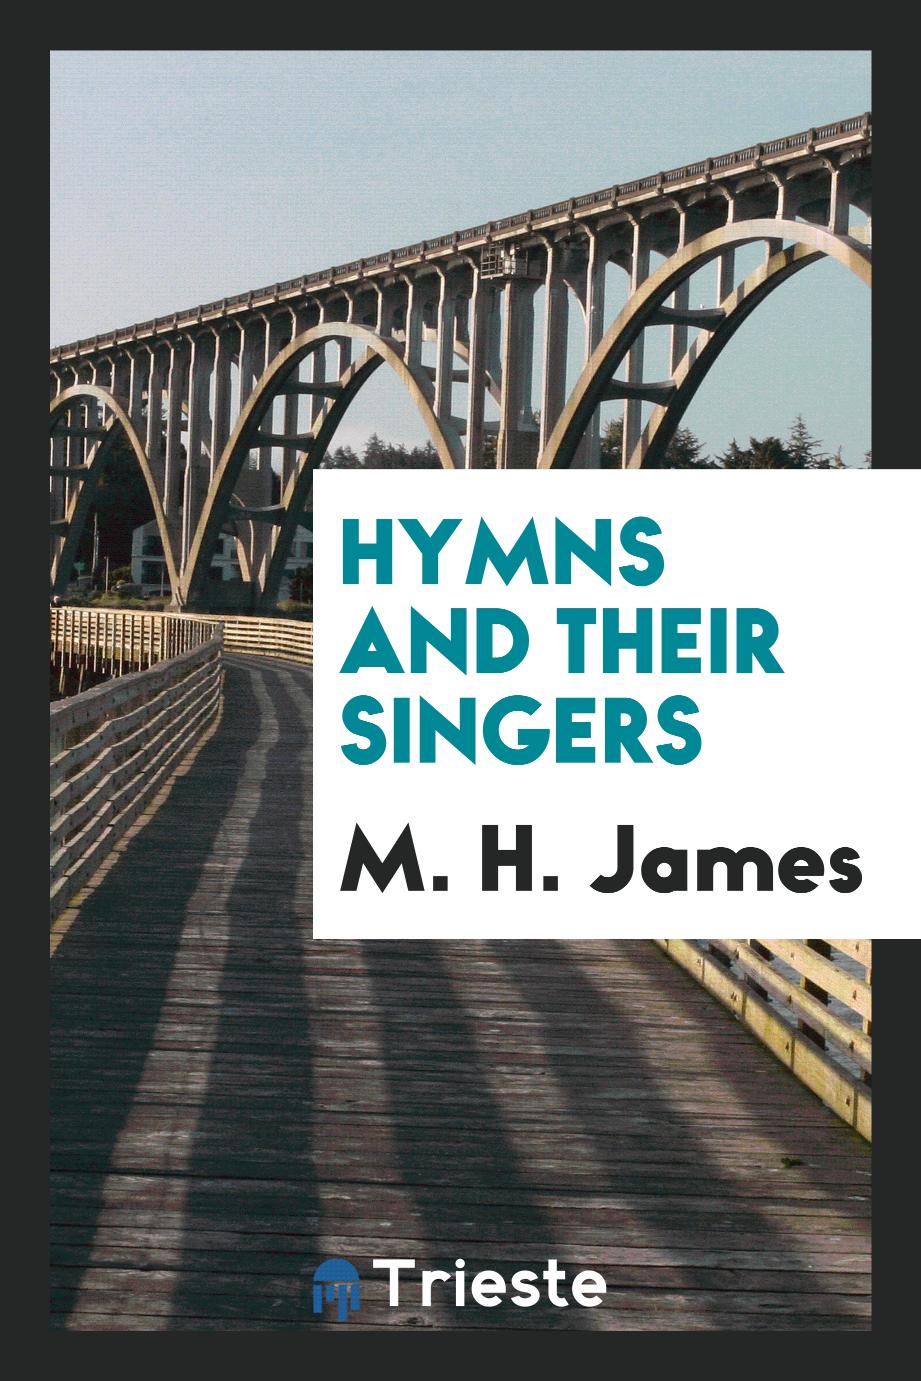 Hymns and their singers